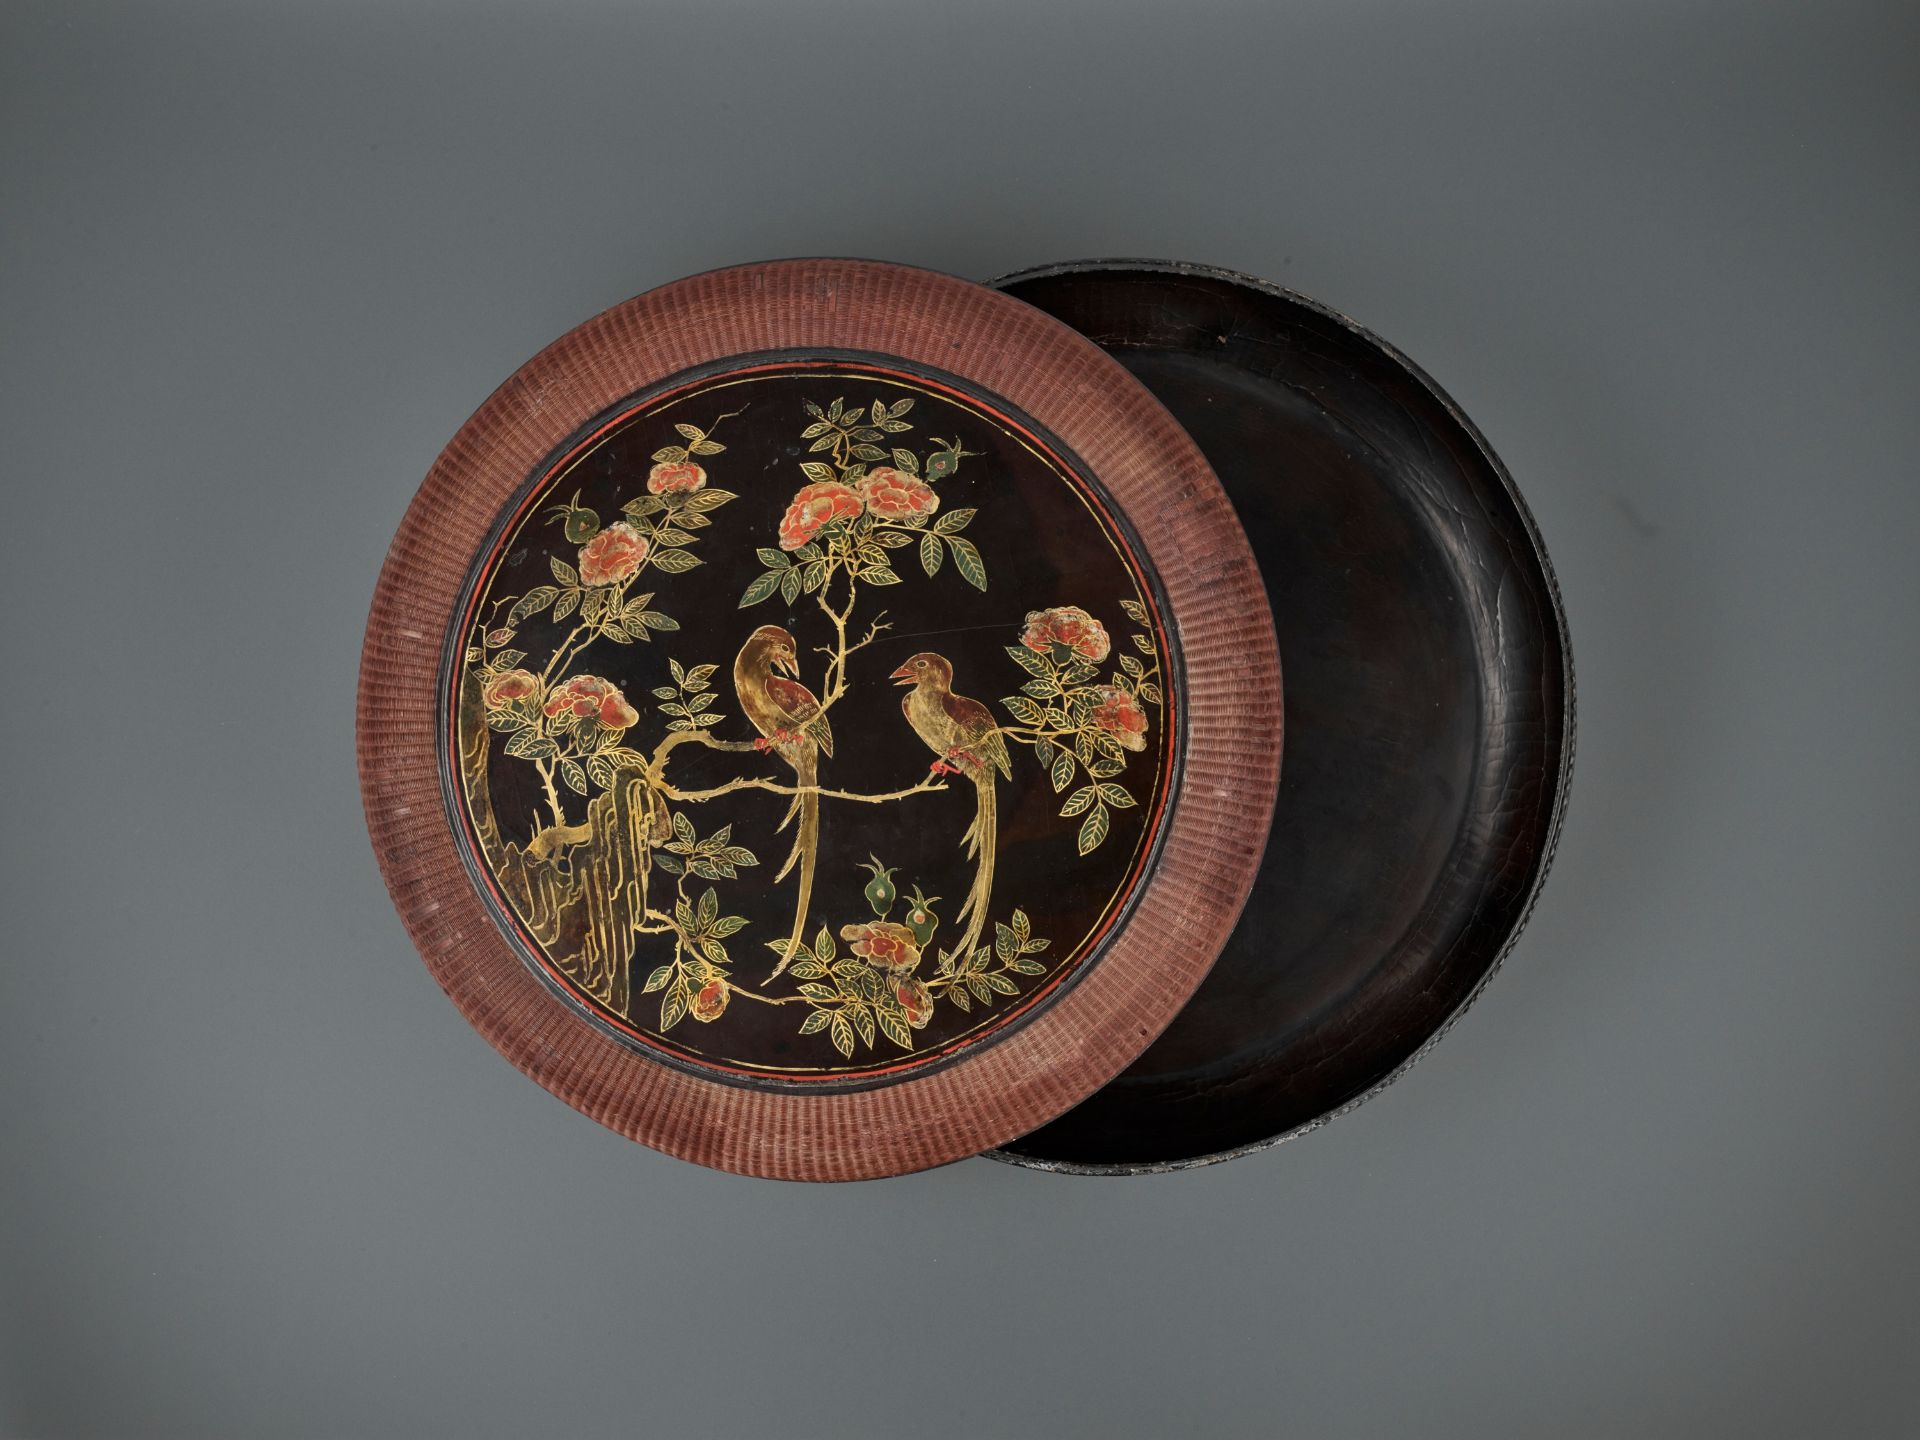 A PAINTED LACQUER 'BASKETWEAVE' BOX AND COVER, DATED 1647